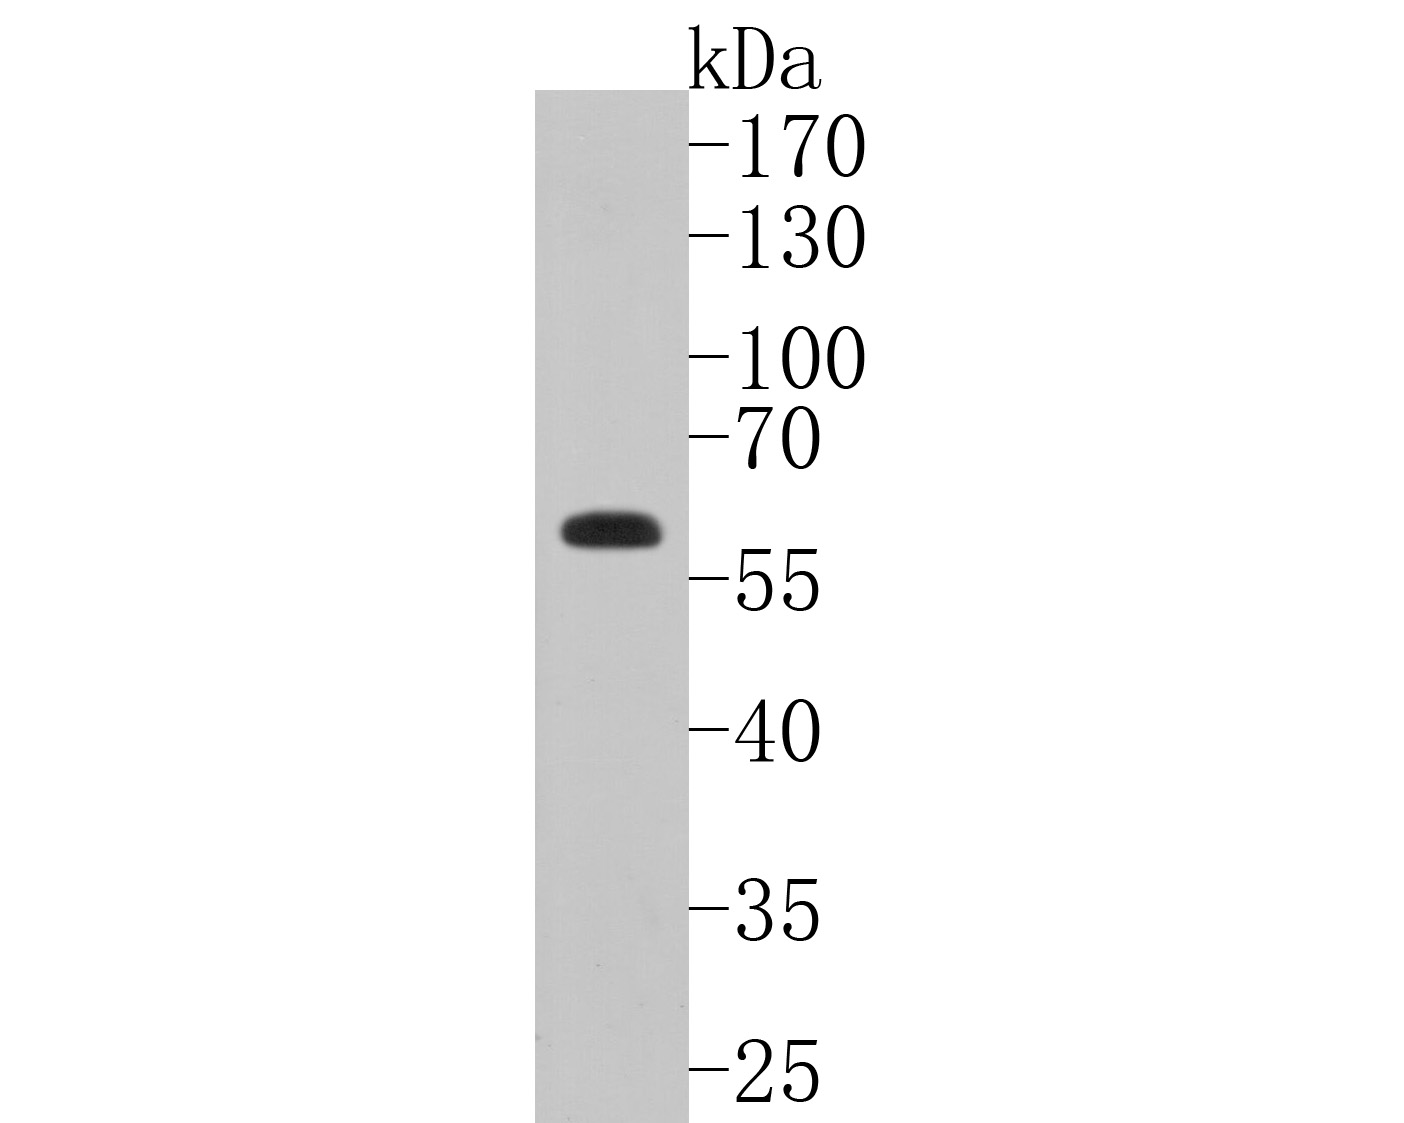 Western blot analysis of EIF2A on A431 cell lysates. Proteins were transferred to a PVDF membrane and blocked with 5% BSA in PBS for 1 hour at room temperature. The primary antibody (ET7111-34, 1/500) was used in 5% BSA at room temperature for 2 hours. Goat Anti-Rabbit IgG - HRP Secondary Antibody (HA1001) at 1:5,000 dilution was used for 1 hour at room temperature.